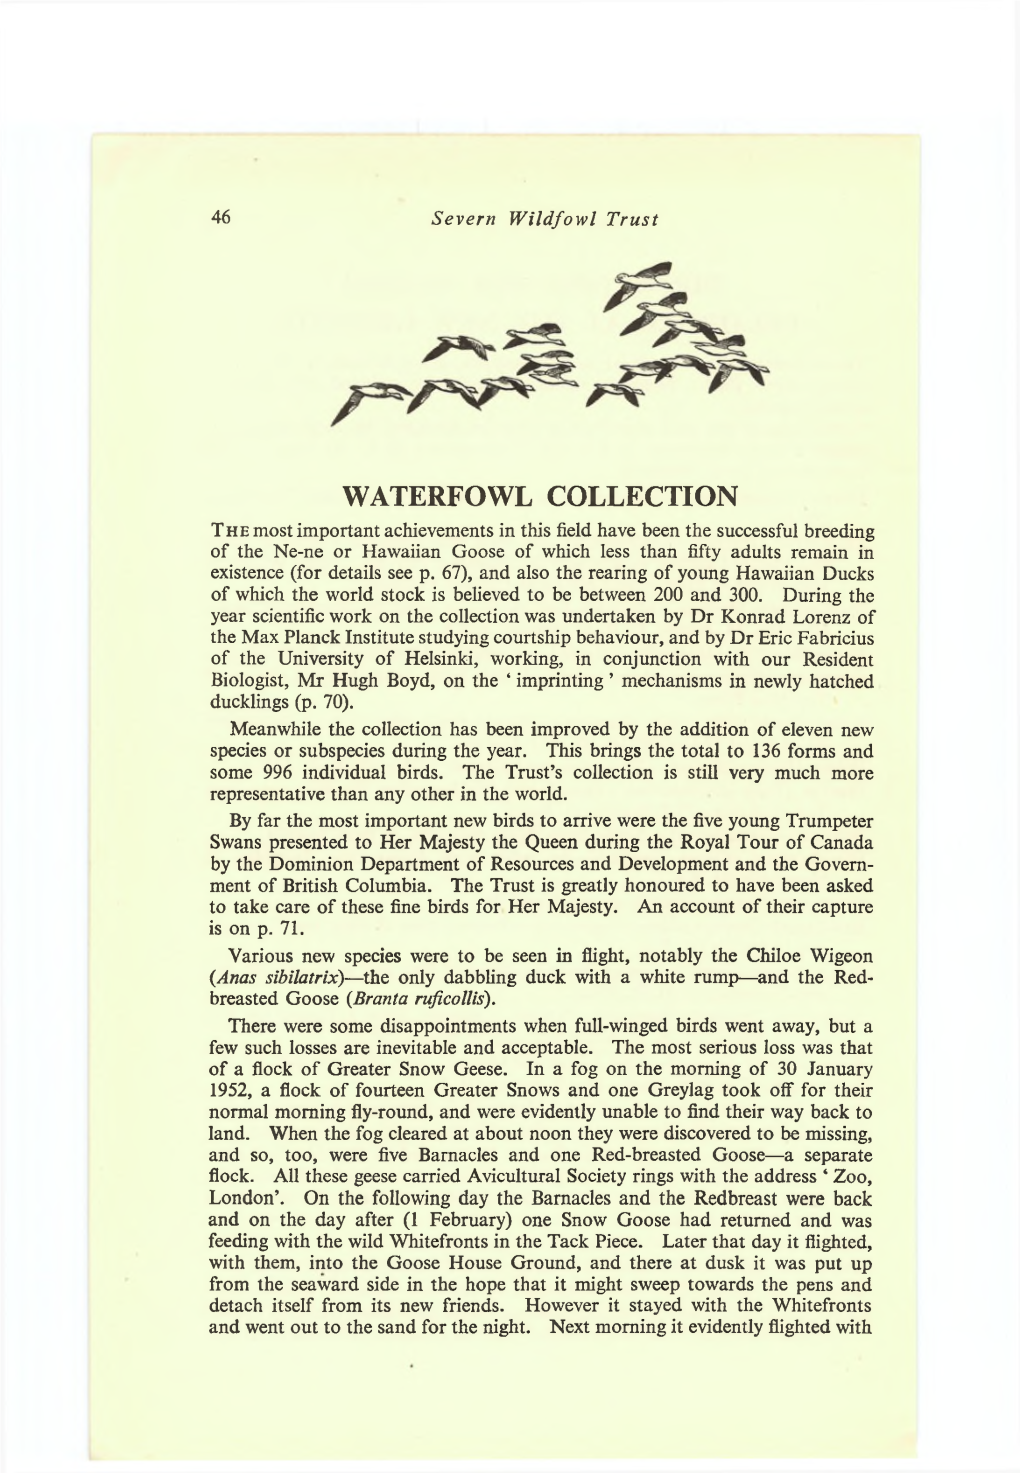 Waterfowl Collection